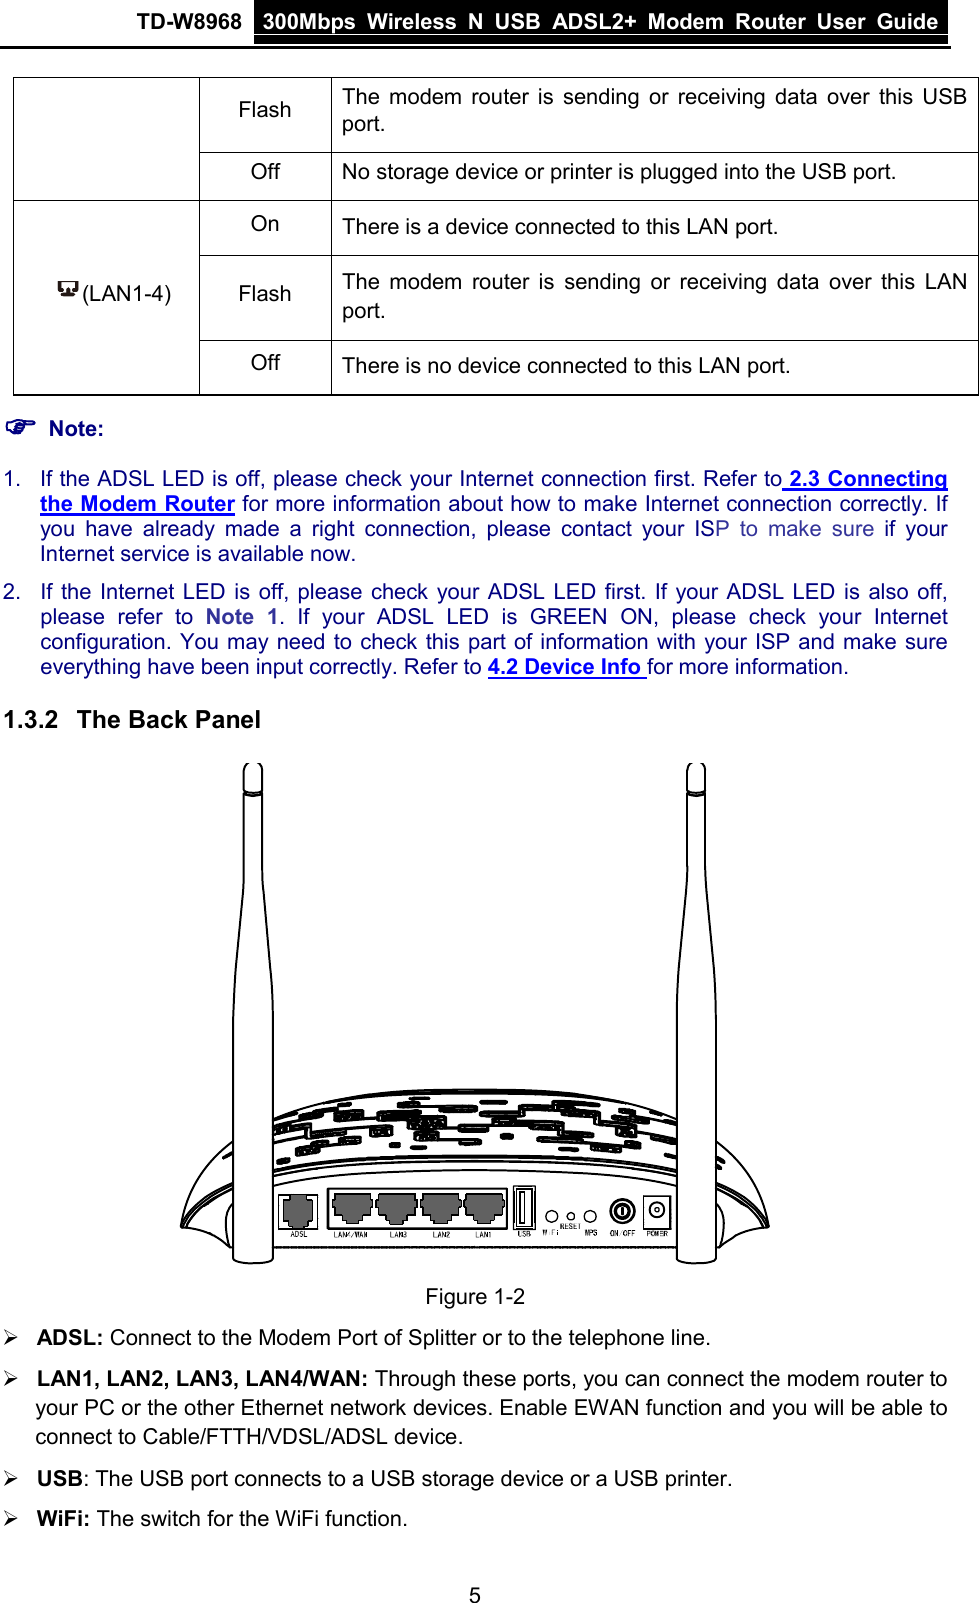 TD-W8968 300Mbps Wireless  N  USB ADSL2+ Modem Router  User Guide  Flash The modem router is sending or receiving data over this USB port. Off No storage device or printer is plugged into the USB port. (LAN1-4) On There is a device connected to this LAN port. Flash The modem router is sending or receiving data over this LAN port. Off There is no device connected to this LAN port.  Note: 1. If the ADSL LED is off, please check your Internet connection first. Refer to 2.3 Connecting the Modem Router for more information about how to make Internet connection correctly. If you have already made a right connection, please contact your ISP to make sure if your Internet service is available now. 2. If the Internet LED is off, please check your ADSL LED first. If your ADSL LED is also off, please refer to Note 1. If your ADSL LED is GREEN ON, please check your Internet configuration. You may need to check this part of information with your ISP and make sure everything have been input correctly. Refer to 4.2 Device Info for more information. 1.3.2 The Back Panel  Figure 1-2  ADSL: Connect to the Modem Port of Splitter or to the telephone line.  LAN1, LAN2, LAN3, LAN4/WAN: Through these ports, you can connect the modem router to your PC or the other Ethernet network devices. Enable EWAN function and you will be able to connect to Cable/FTTH/VDSL/ADSL device.  USB: The USB port connects to a USB storage device or a USB printer.  WiFi: The switch for the WiFi function. 5 